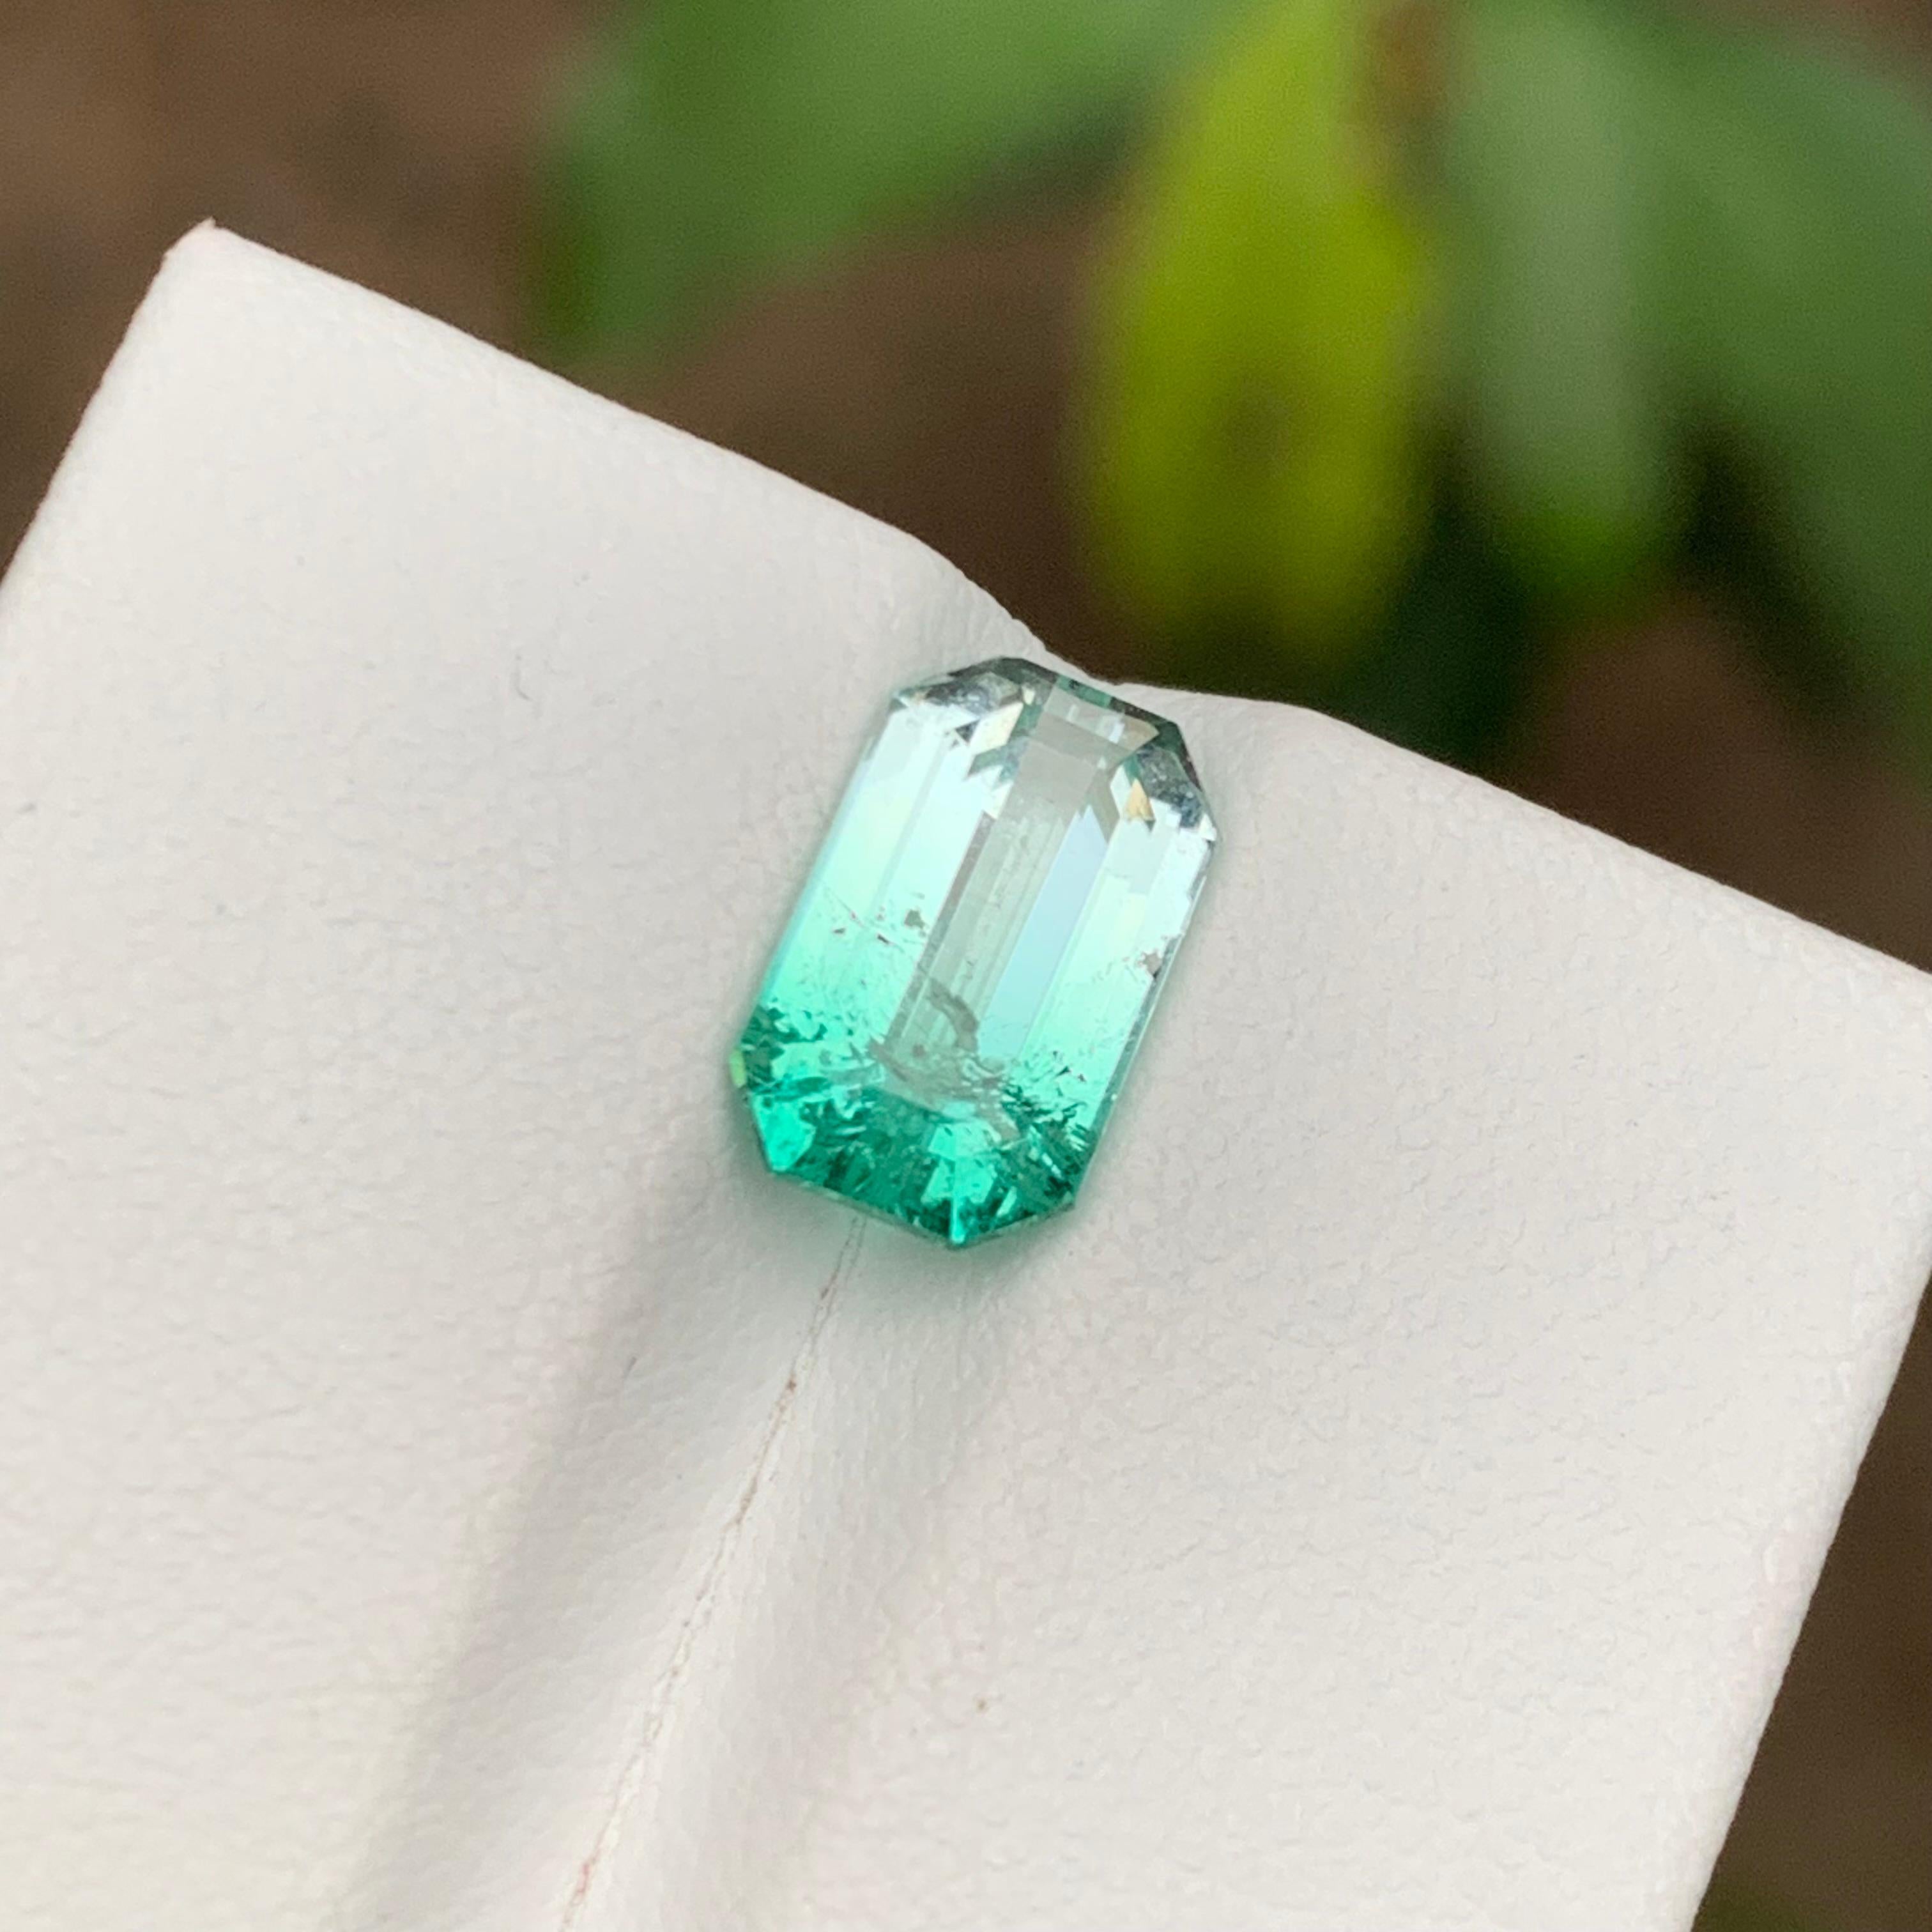 Rare Electric Bluish Green & White Bicolor Tourmaline Gemstone, 2.64 Ct for Ring In New Condition For Sale In Peshawar, PK